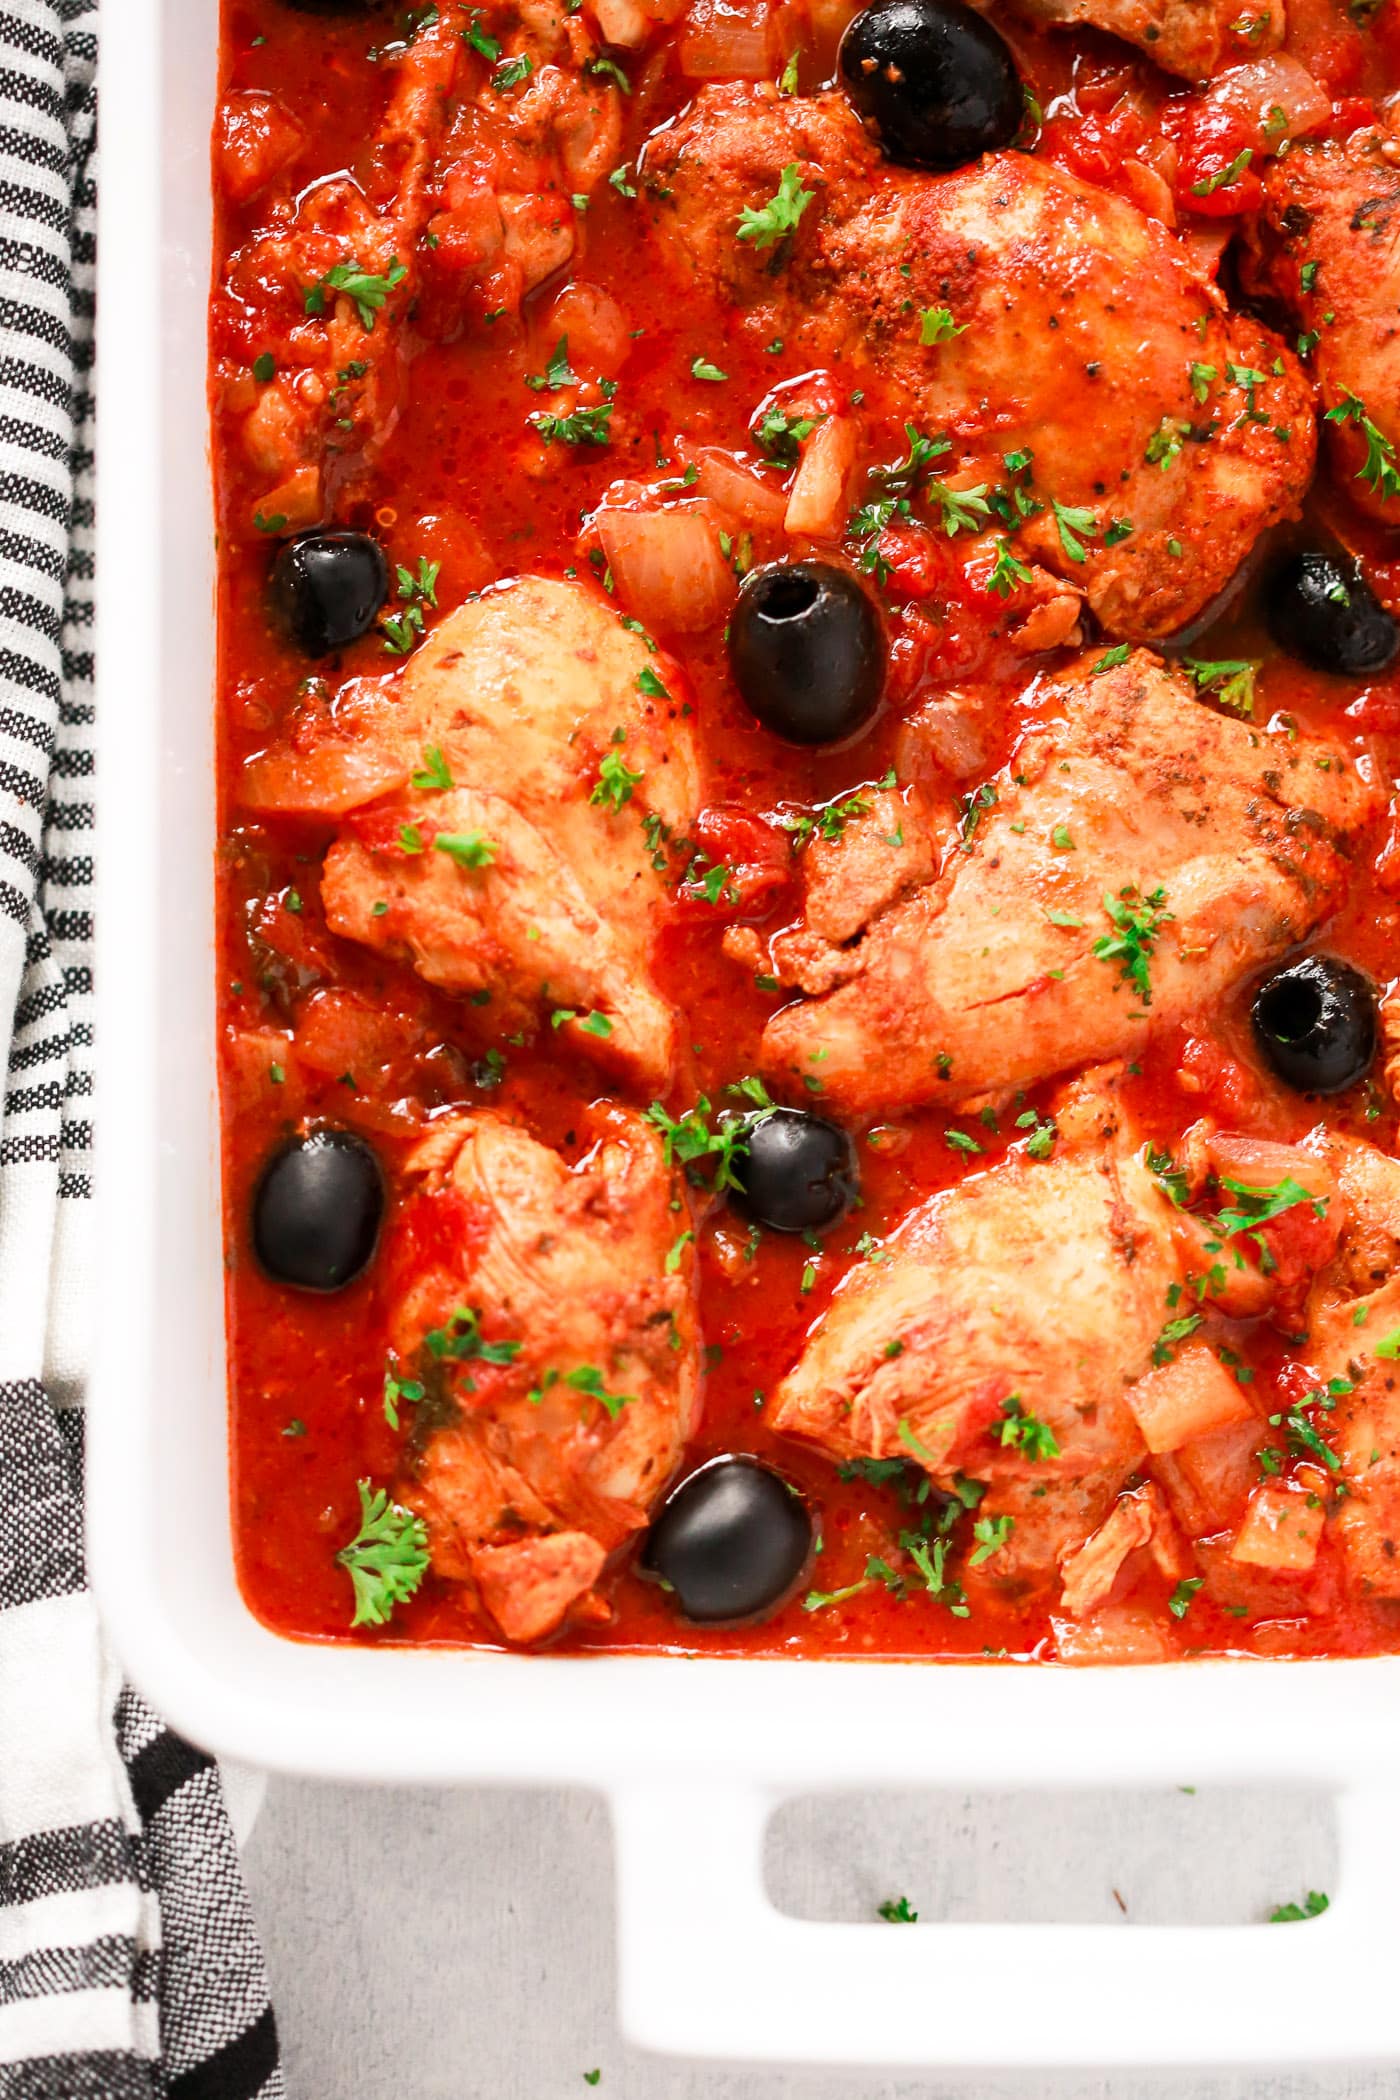 Chicken and tomato sauce in a white serving dish.

